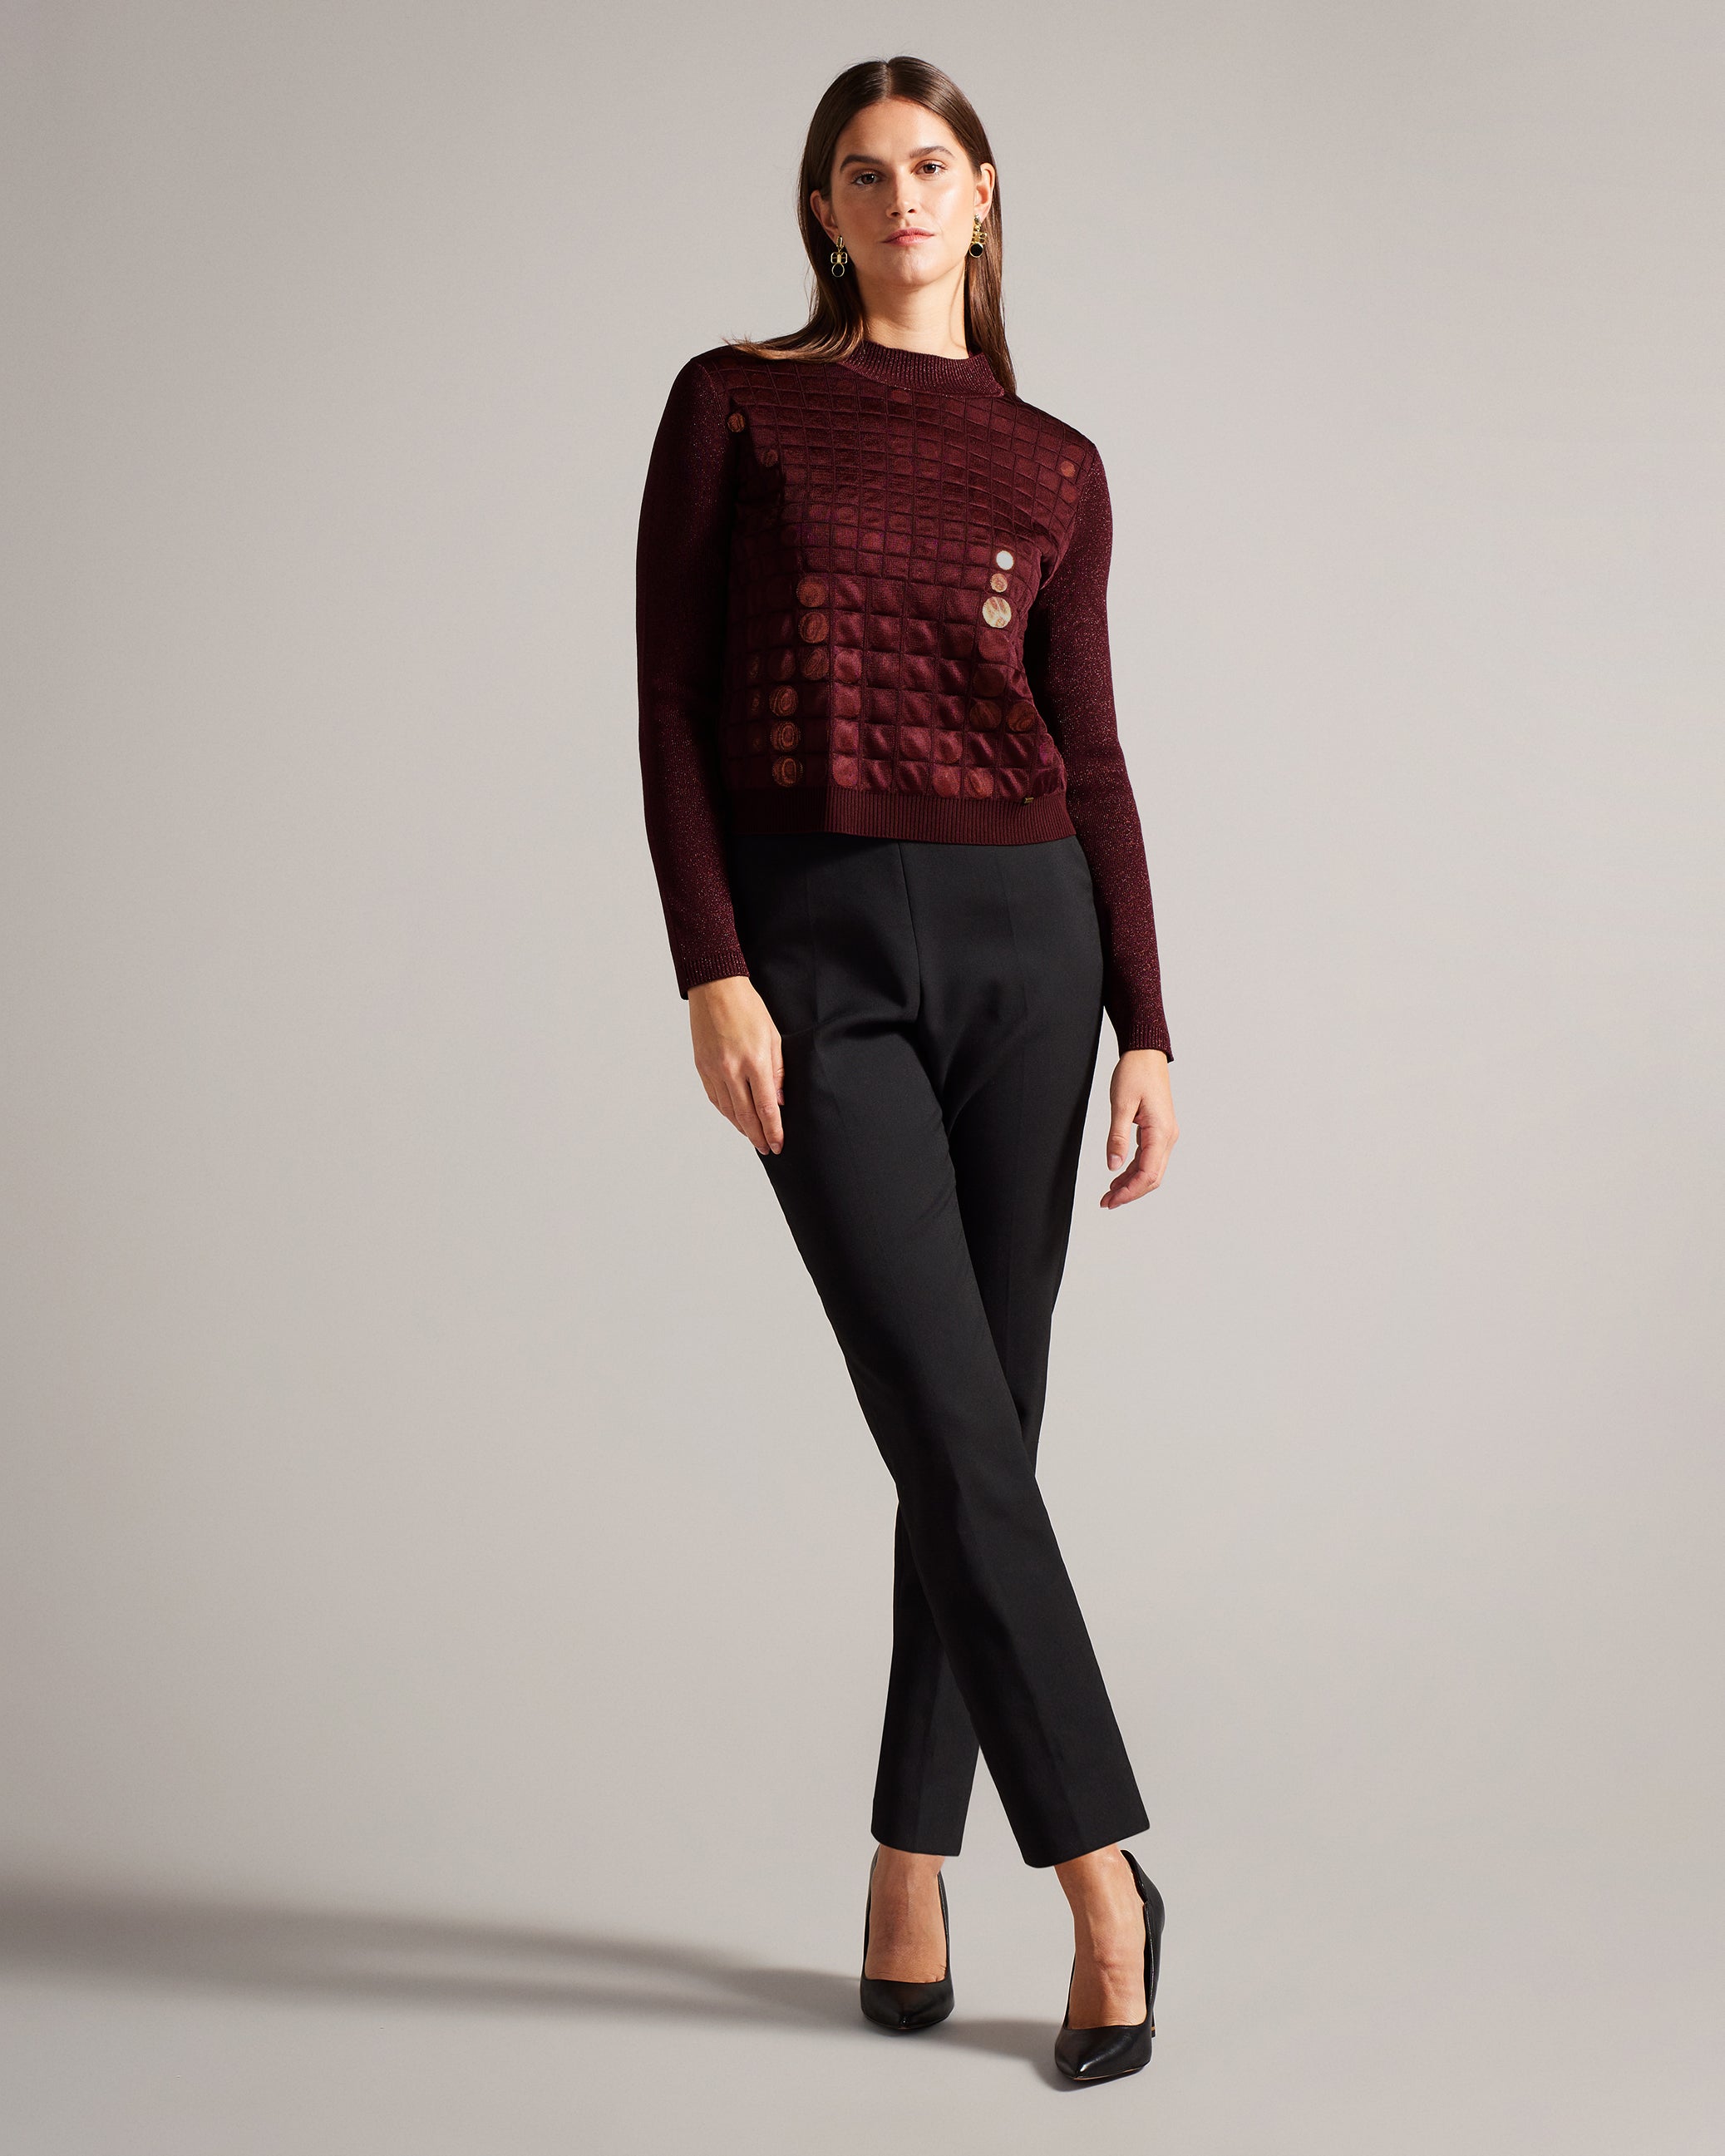 YIVONNE - Trapped Sequin Jumper – Ted Baker, Canada